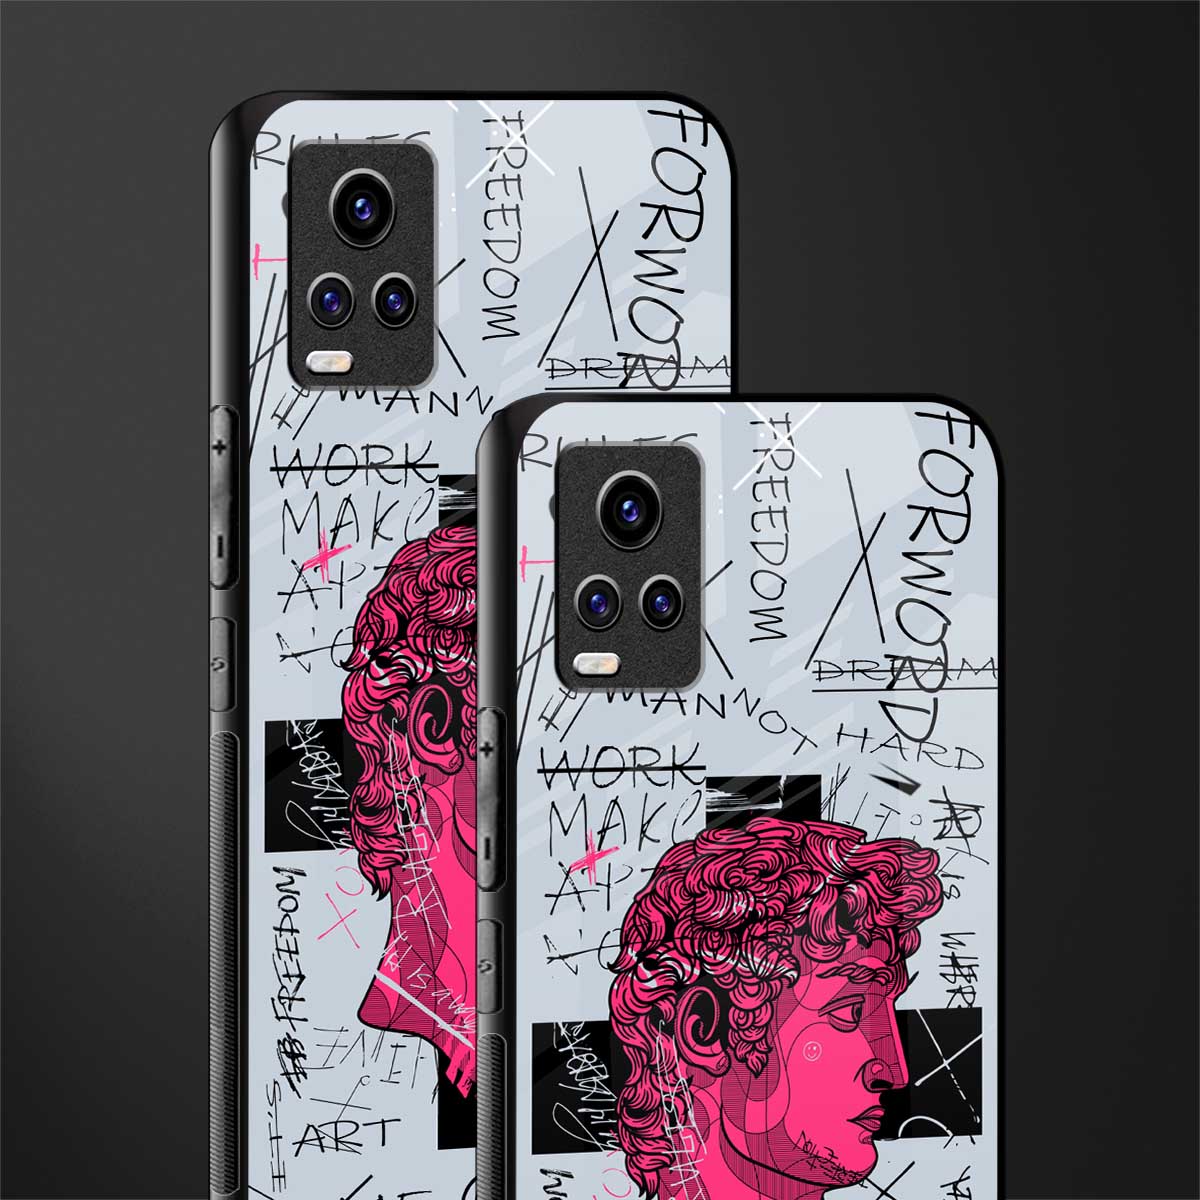 lost in reality david back phone cover | glass case for vivo y73